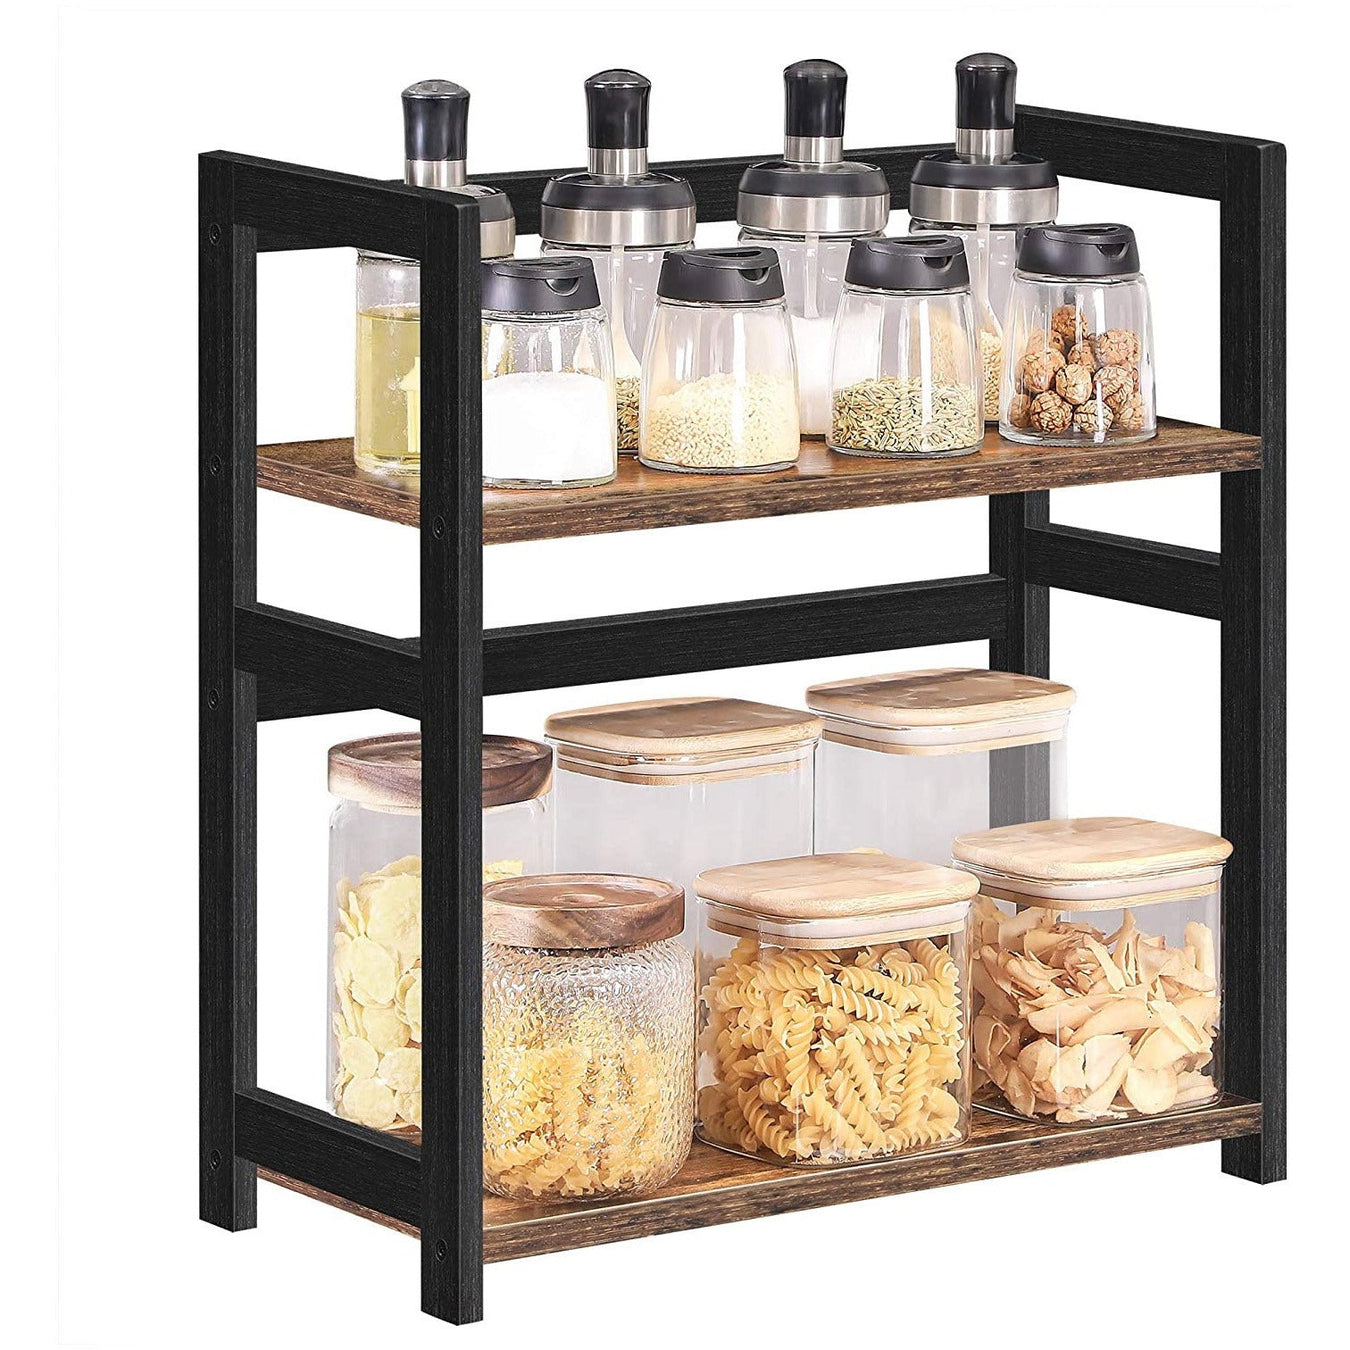 Picture of a spice rack with various storage jars and pots